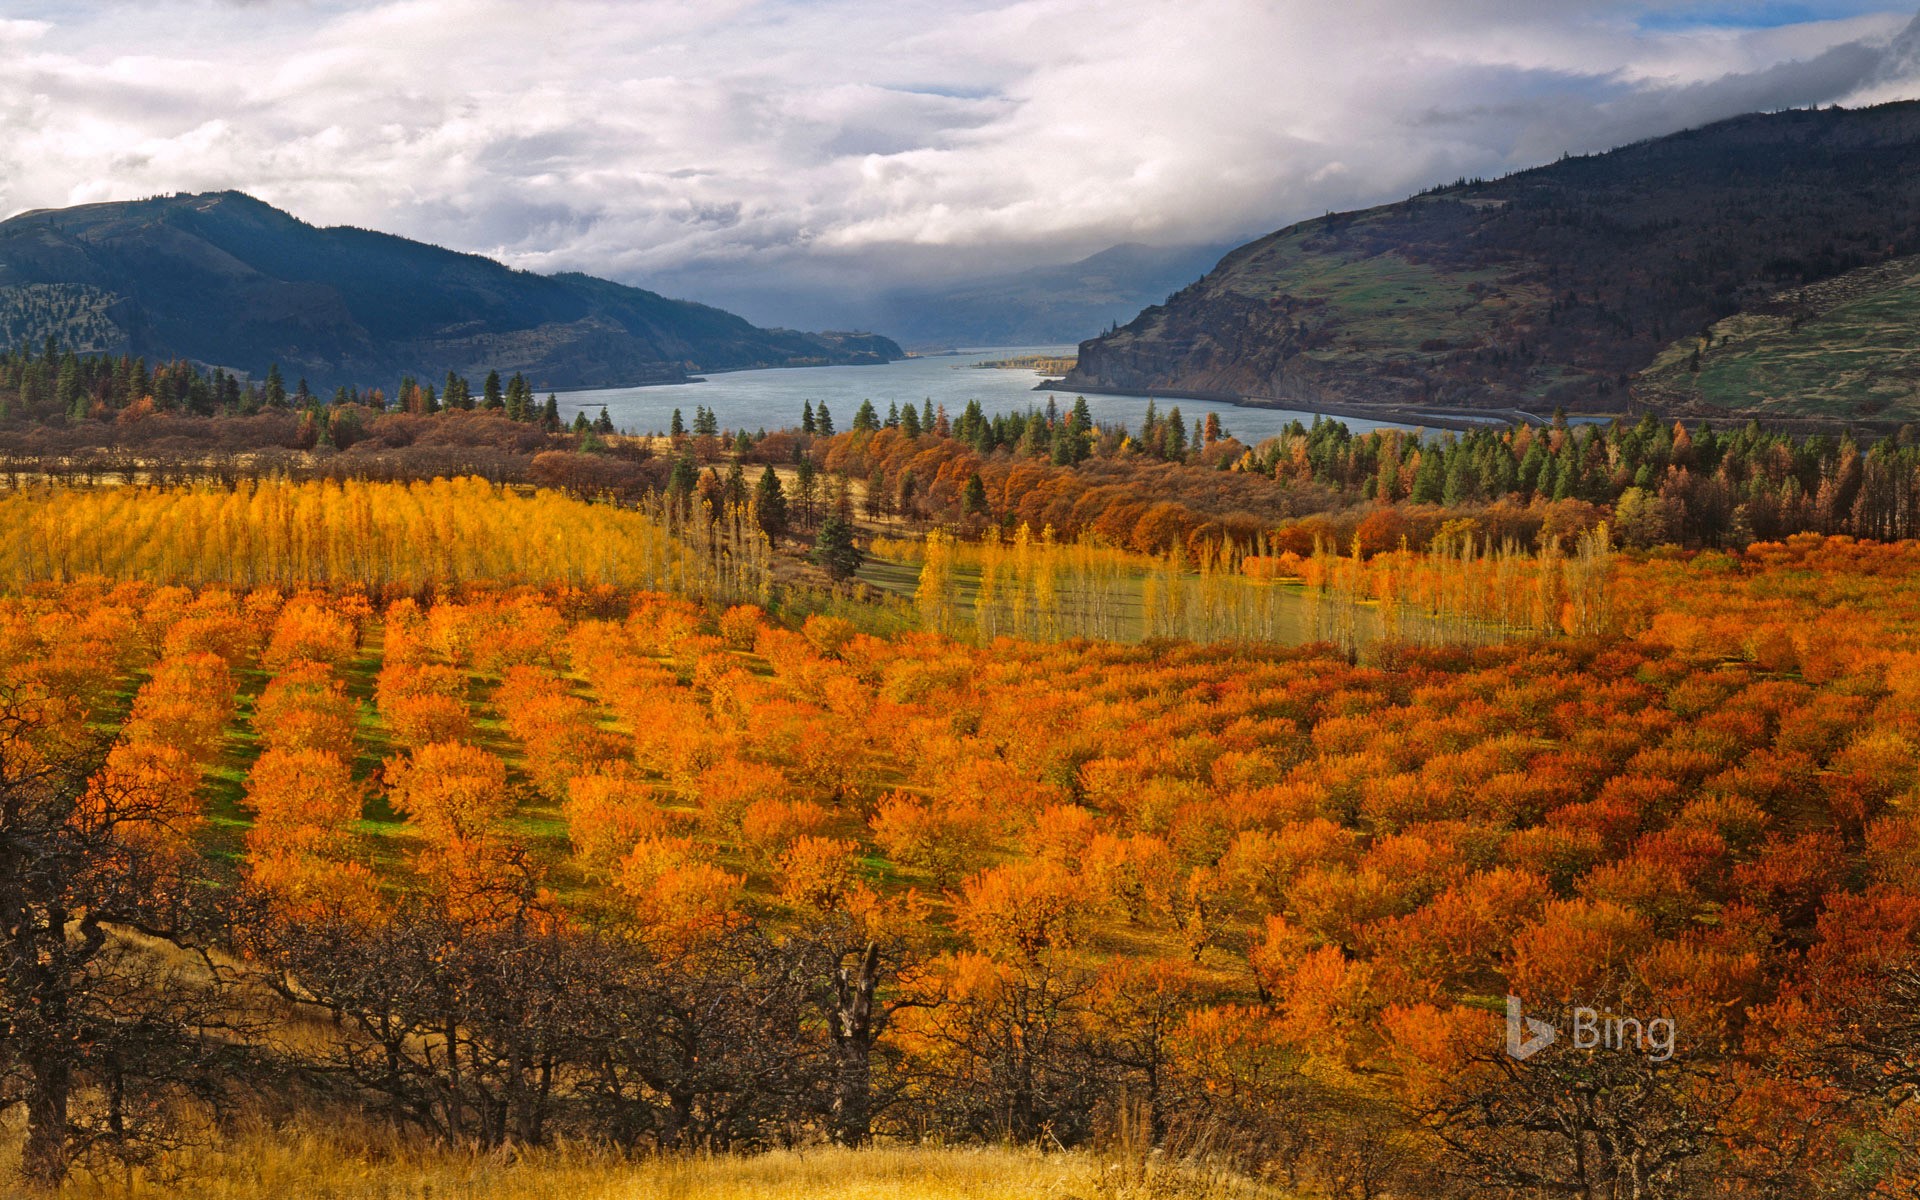 Cherry orchards in the Columbia River Gorge National Scenic Area, Oregon